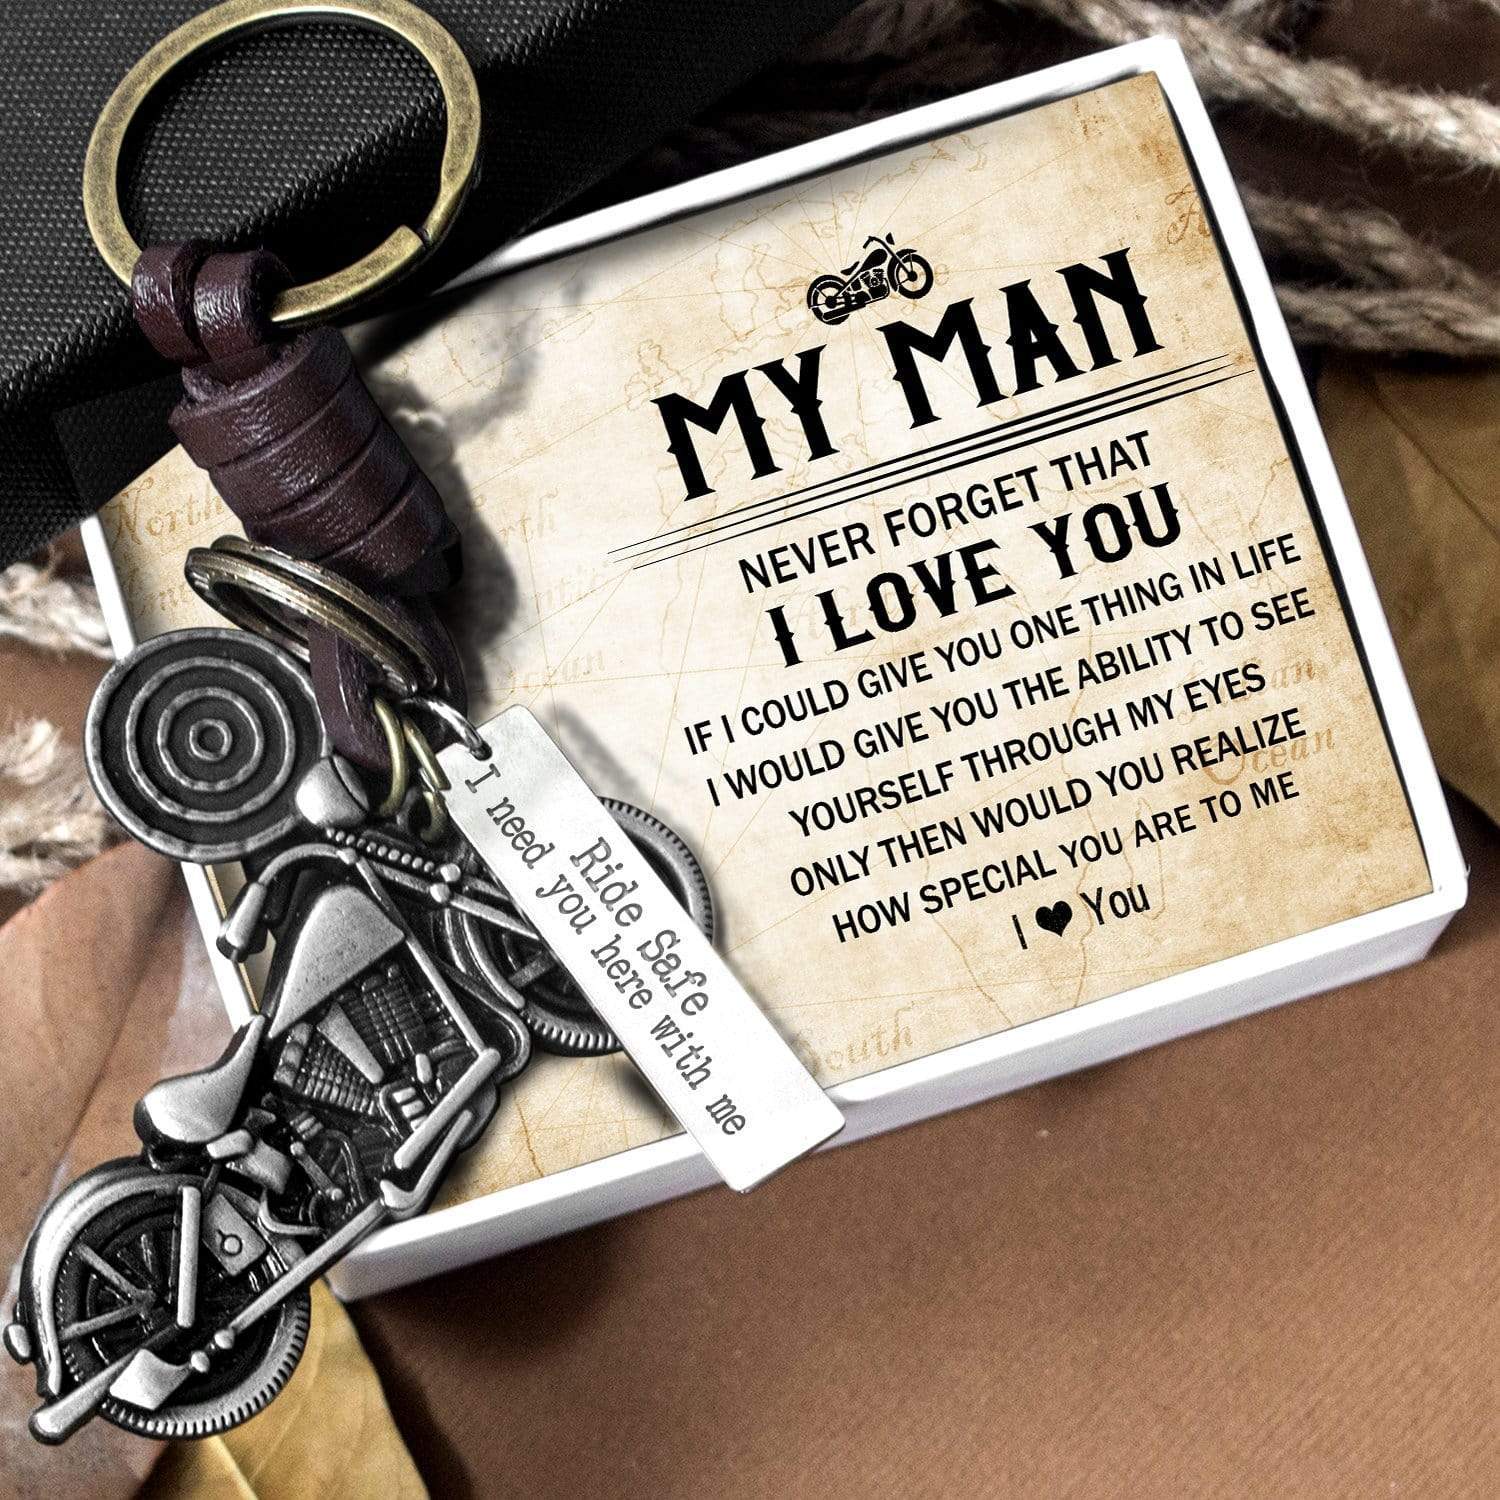 Motorcycle Keychain - To My Man - Ride Safe, I Need You Here With Me - Gkx26014